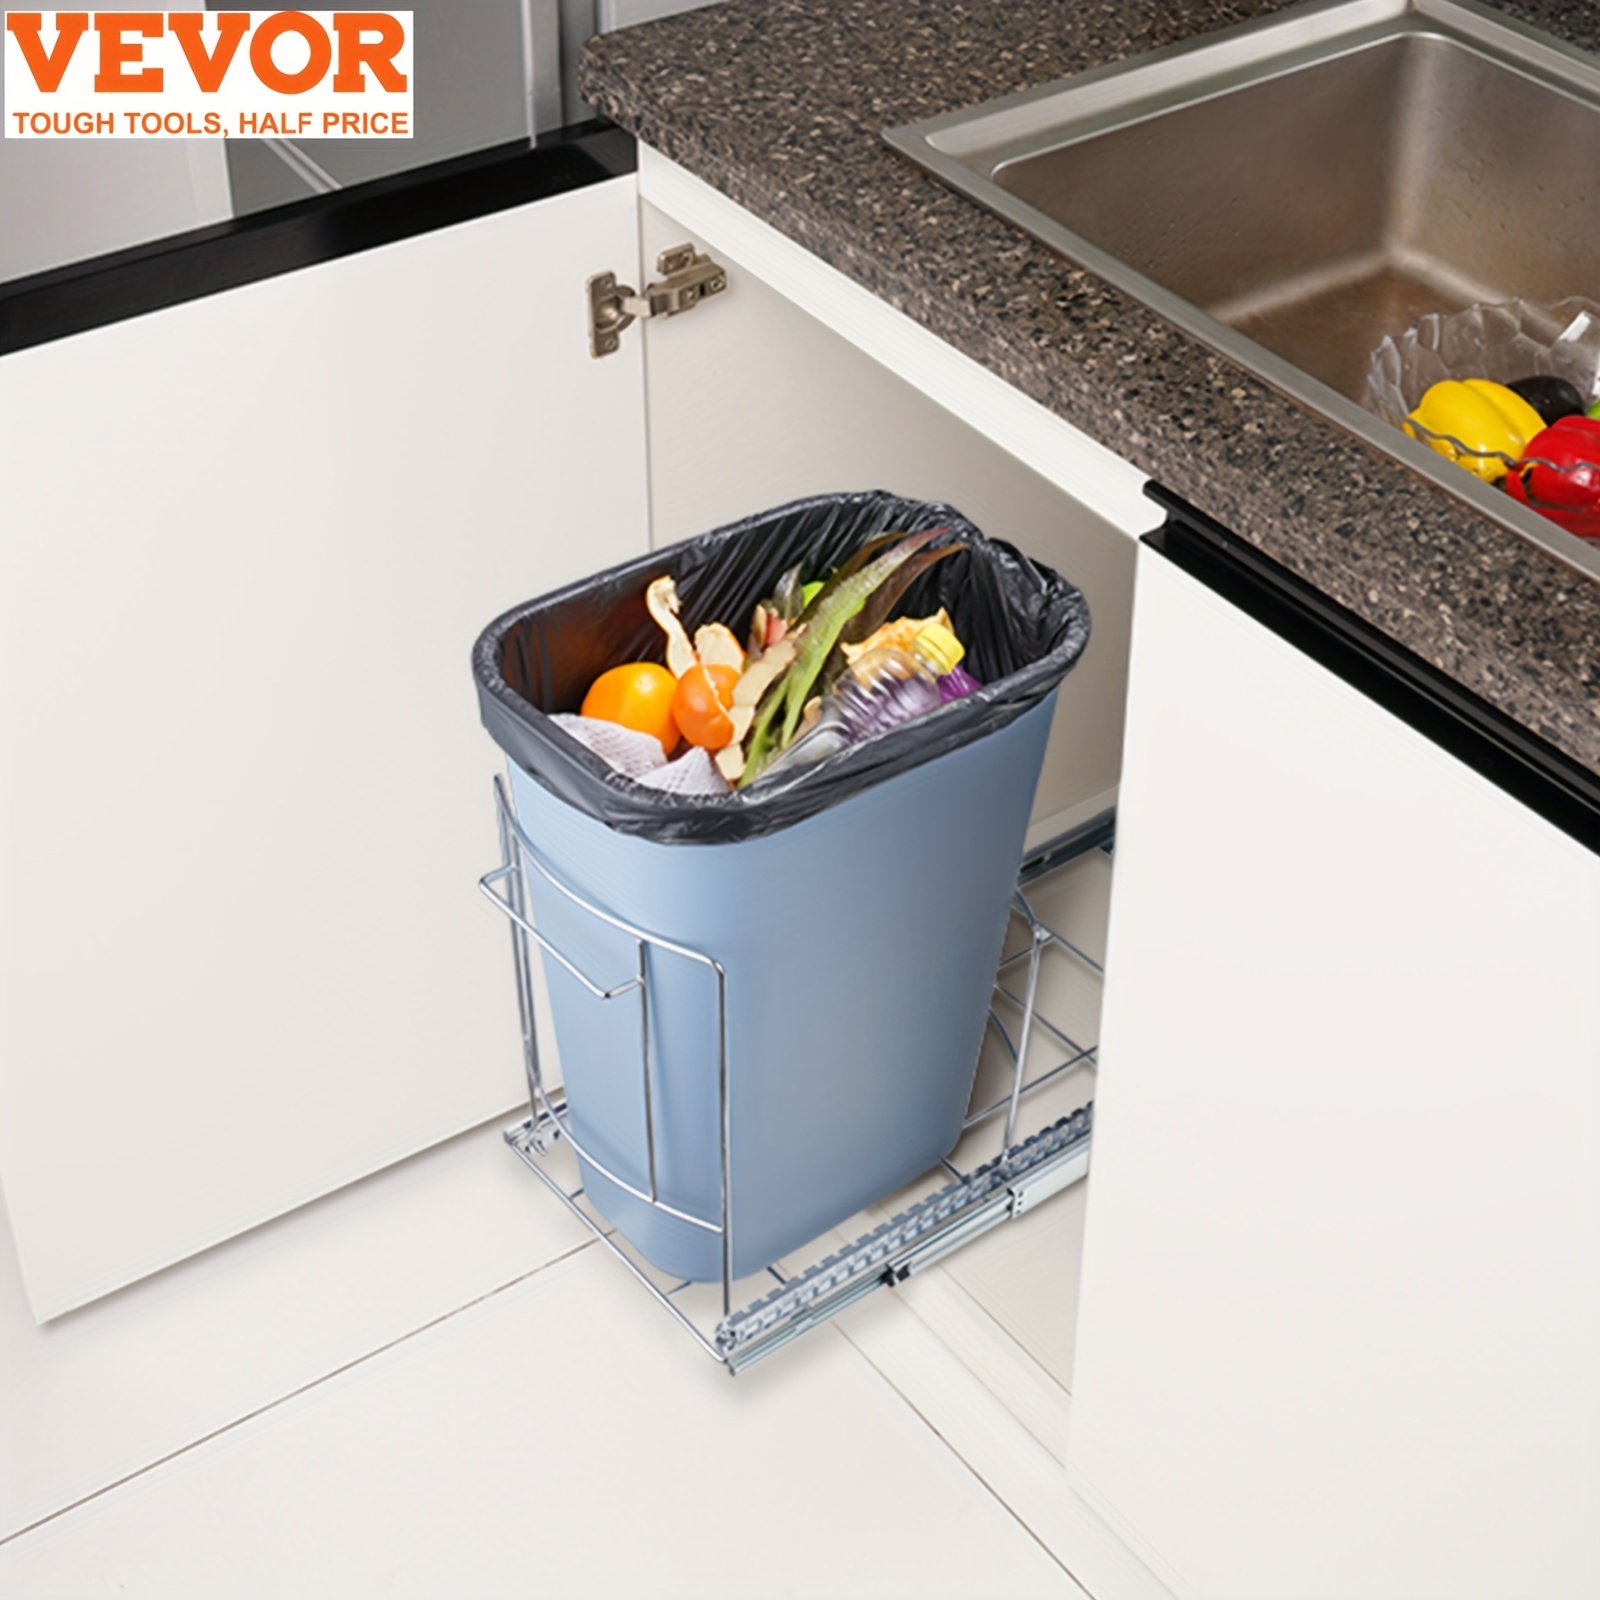 

Pull-out Trash Can, Adjustable Fits Cans Up To 9" X 19.5", Bin Not Include, Under Mount Kitchen Waste Container With Slide And Handle, Requires 13.4" W X 21.2" D X 17.7" H Cabinet Opening